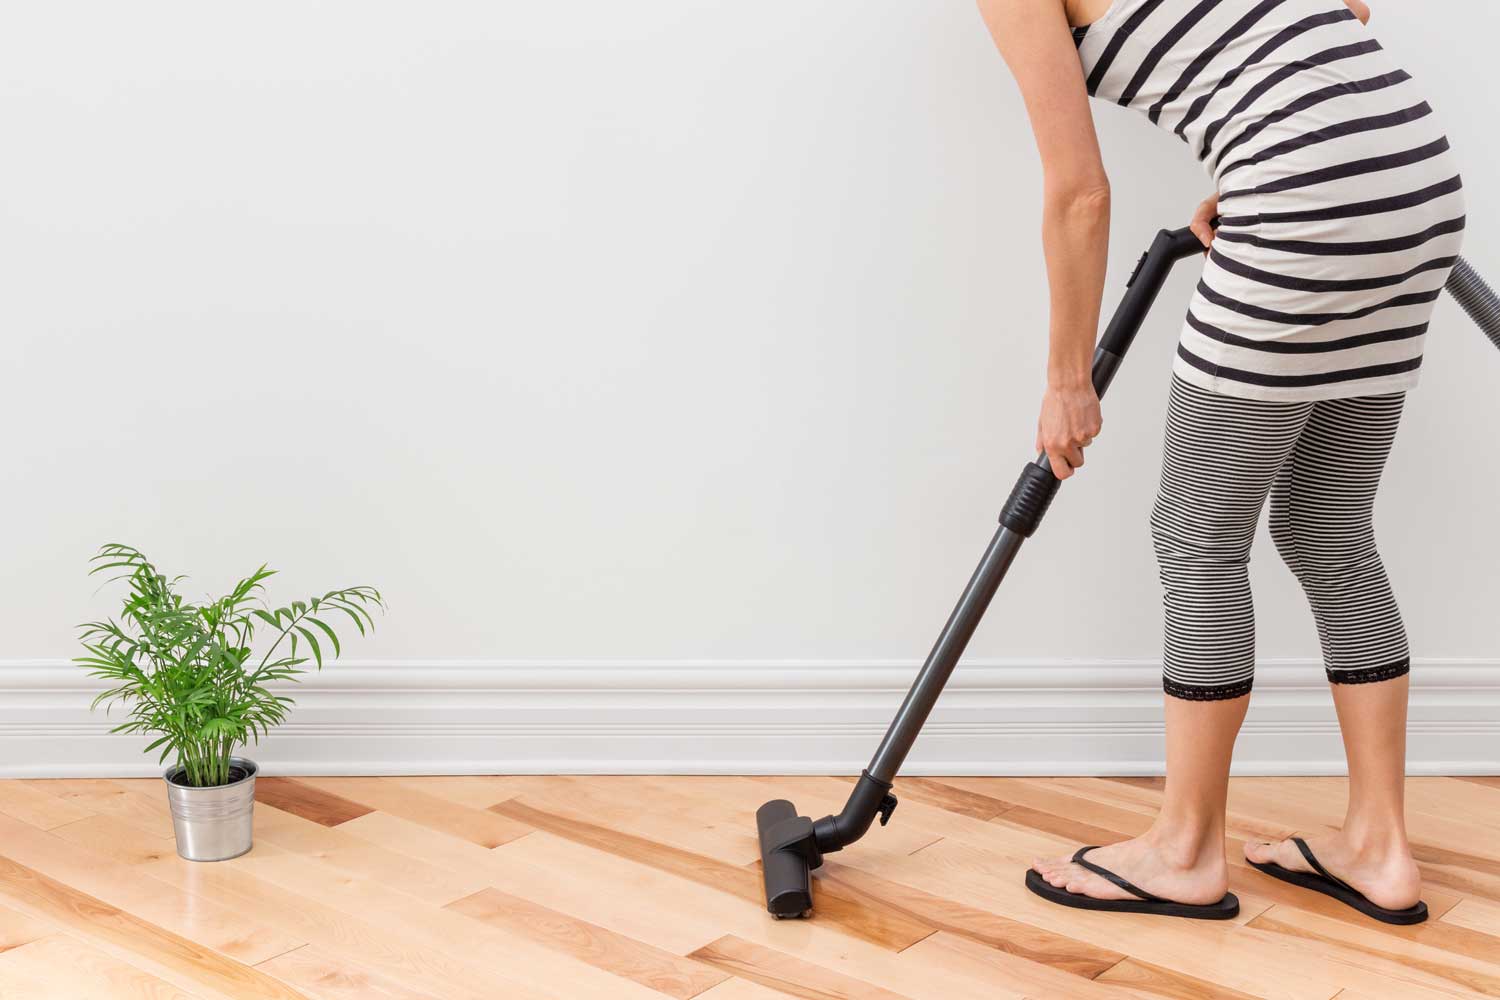 Regulary vacuum or sweep floors to remove dirt and keep your home floors looking amazing - tips from Footprints Floors in Roseville / Folsom.